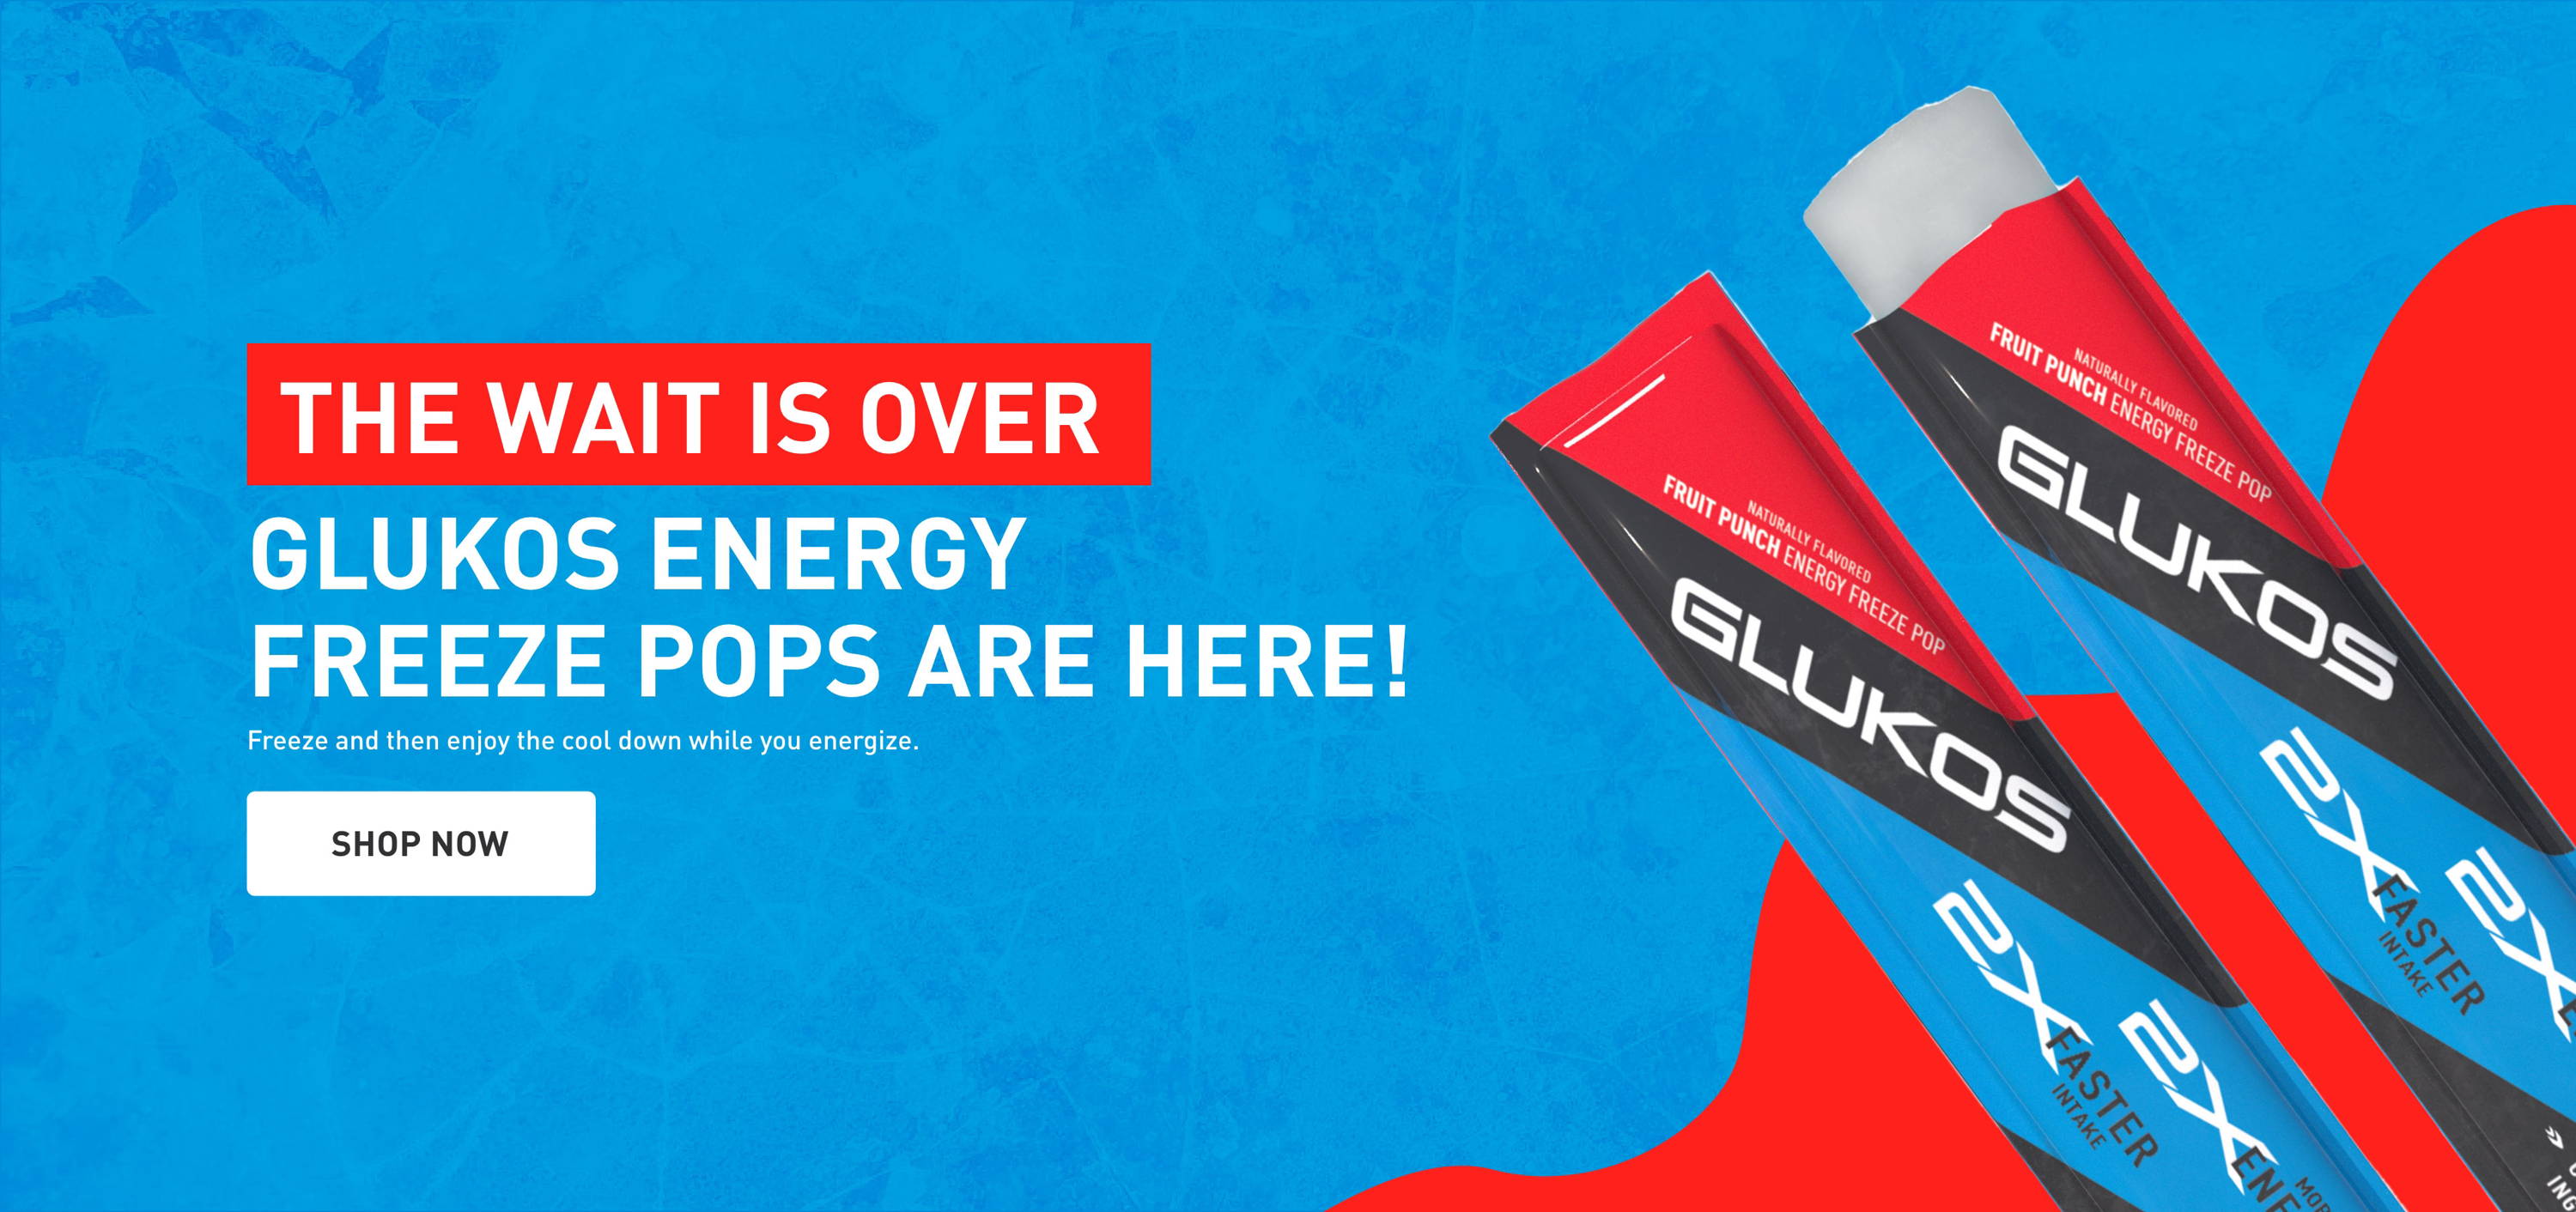 The Wait is Over - Glukos Energy Freeze Pops Are Here! Freeze and the enjoy the cool down while you energize - SHOP NOW